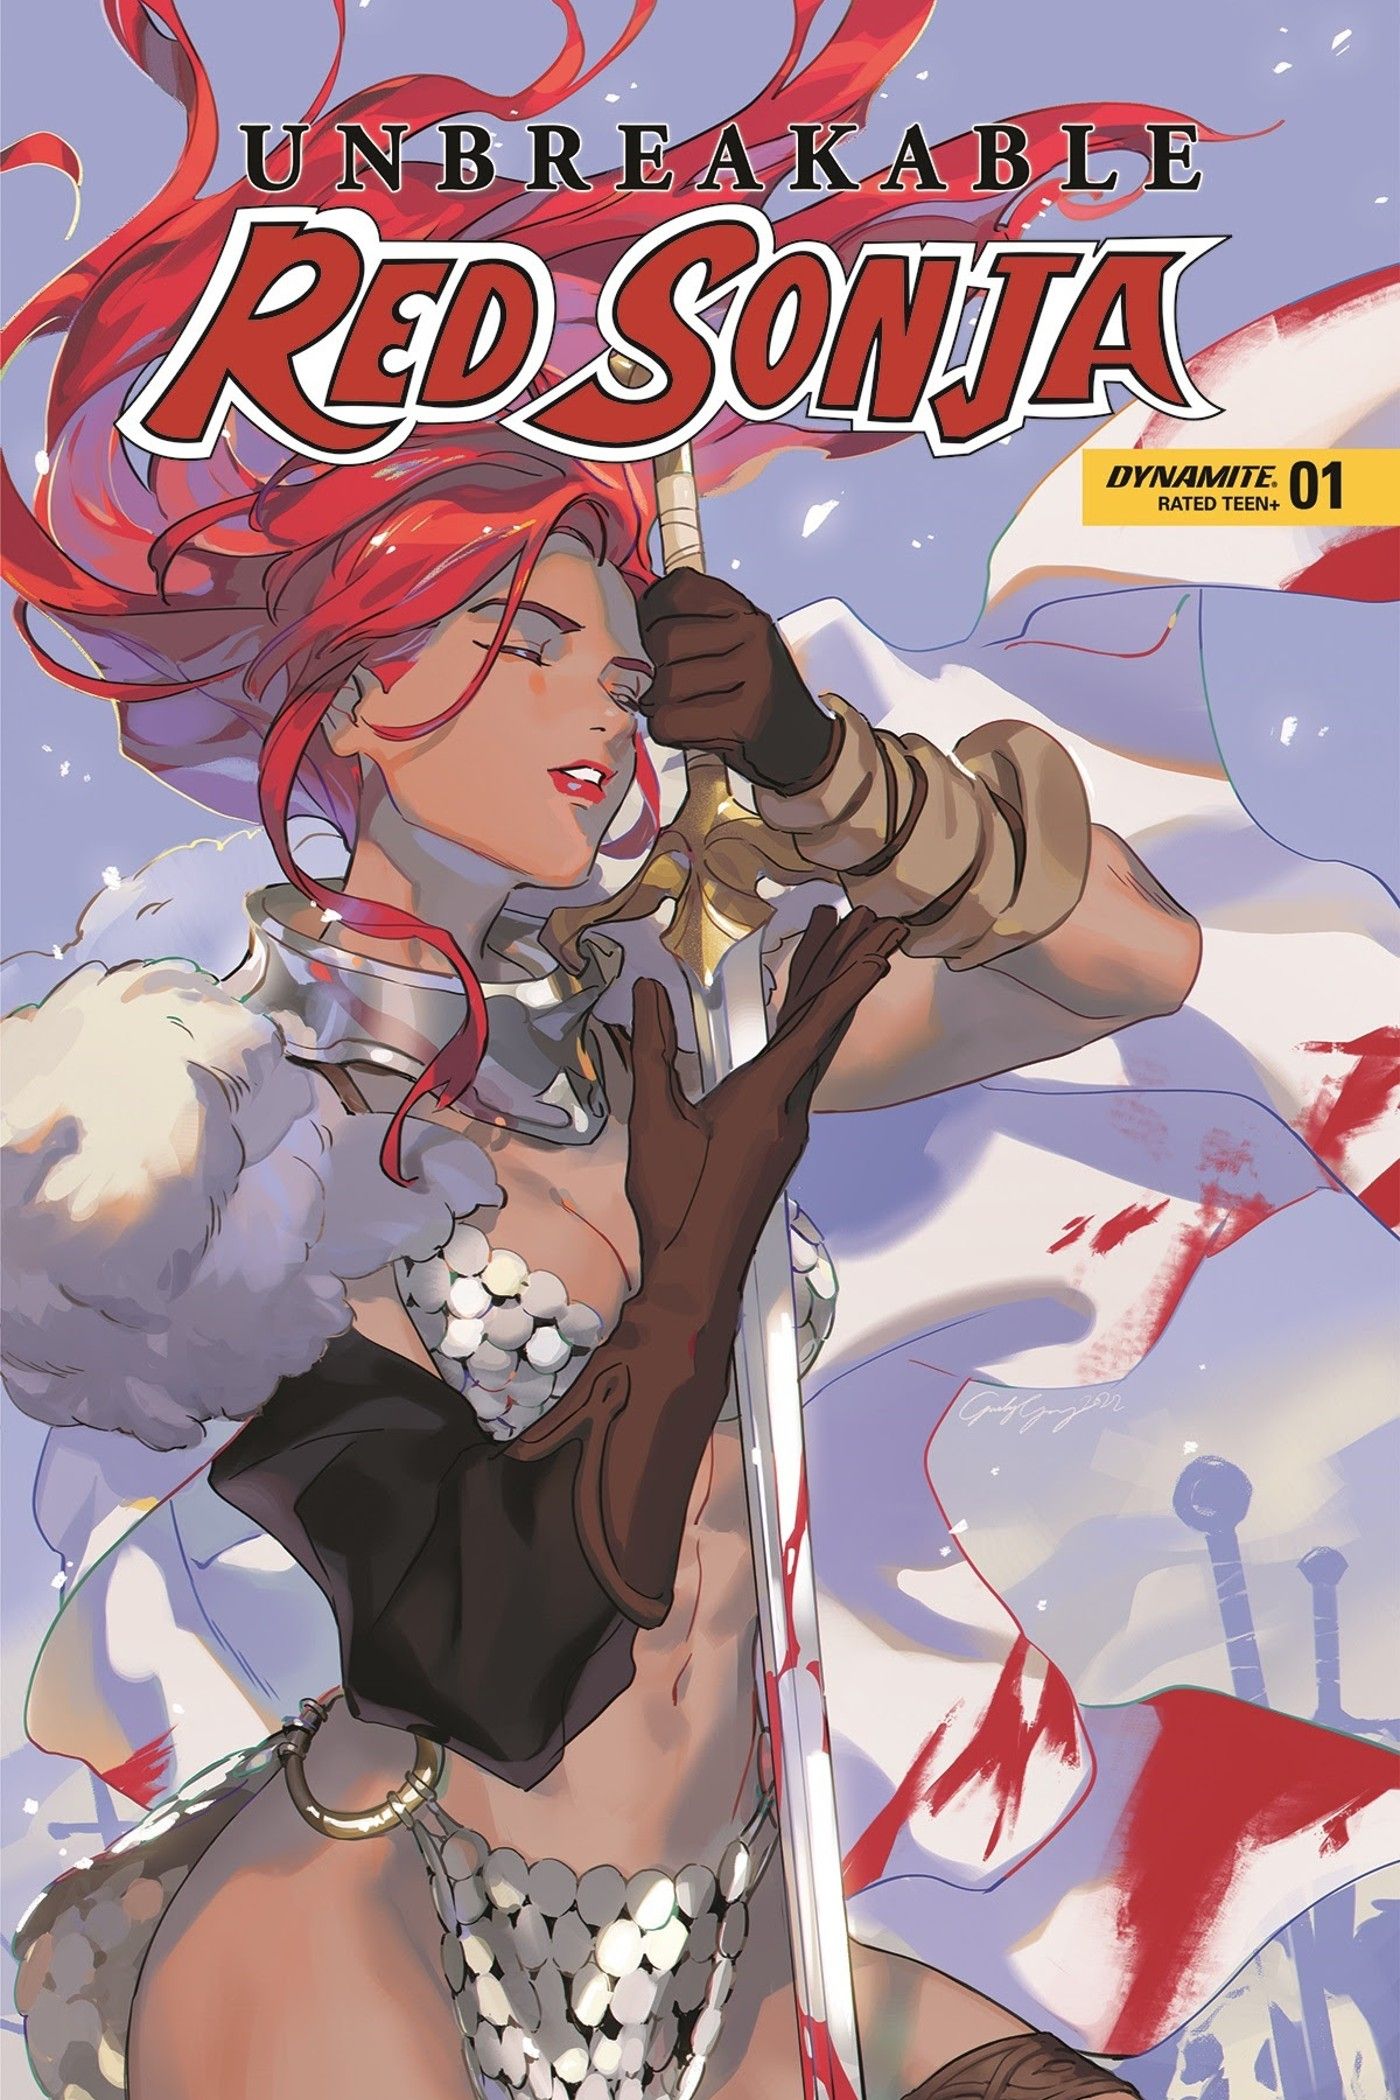 Unbreakable Red Sonja Is the Perfect Jumping-On Point for Barbarian Hero